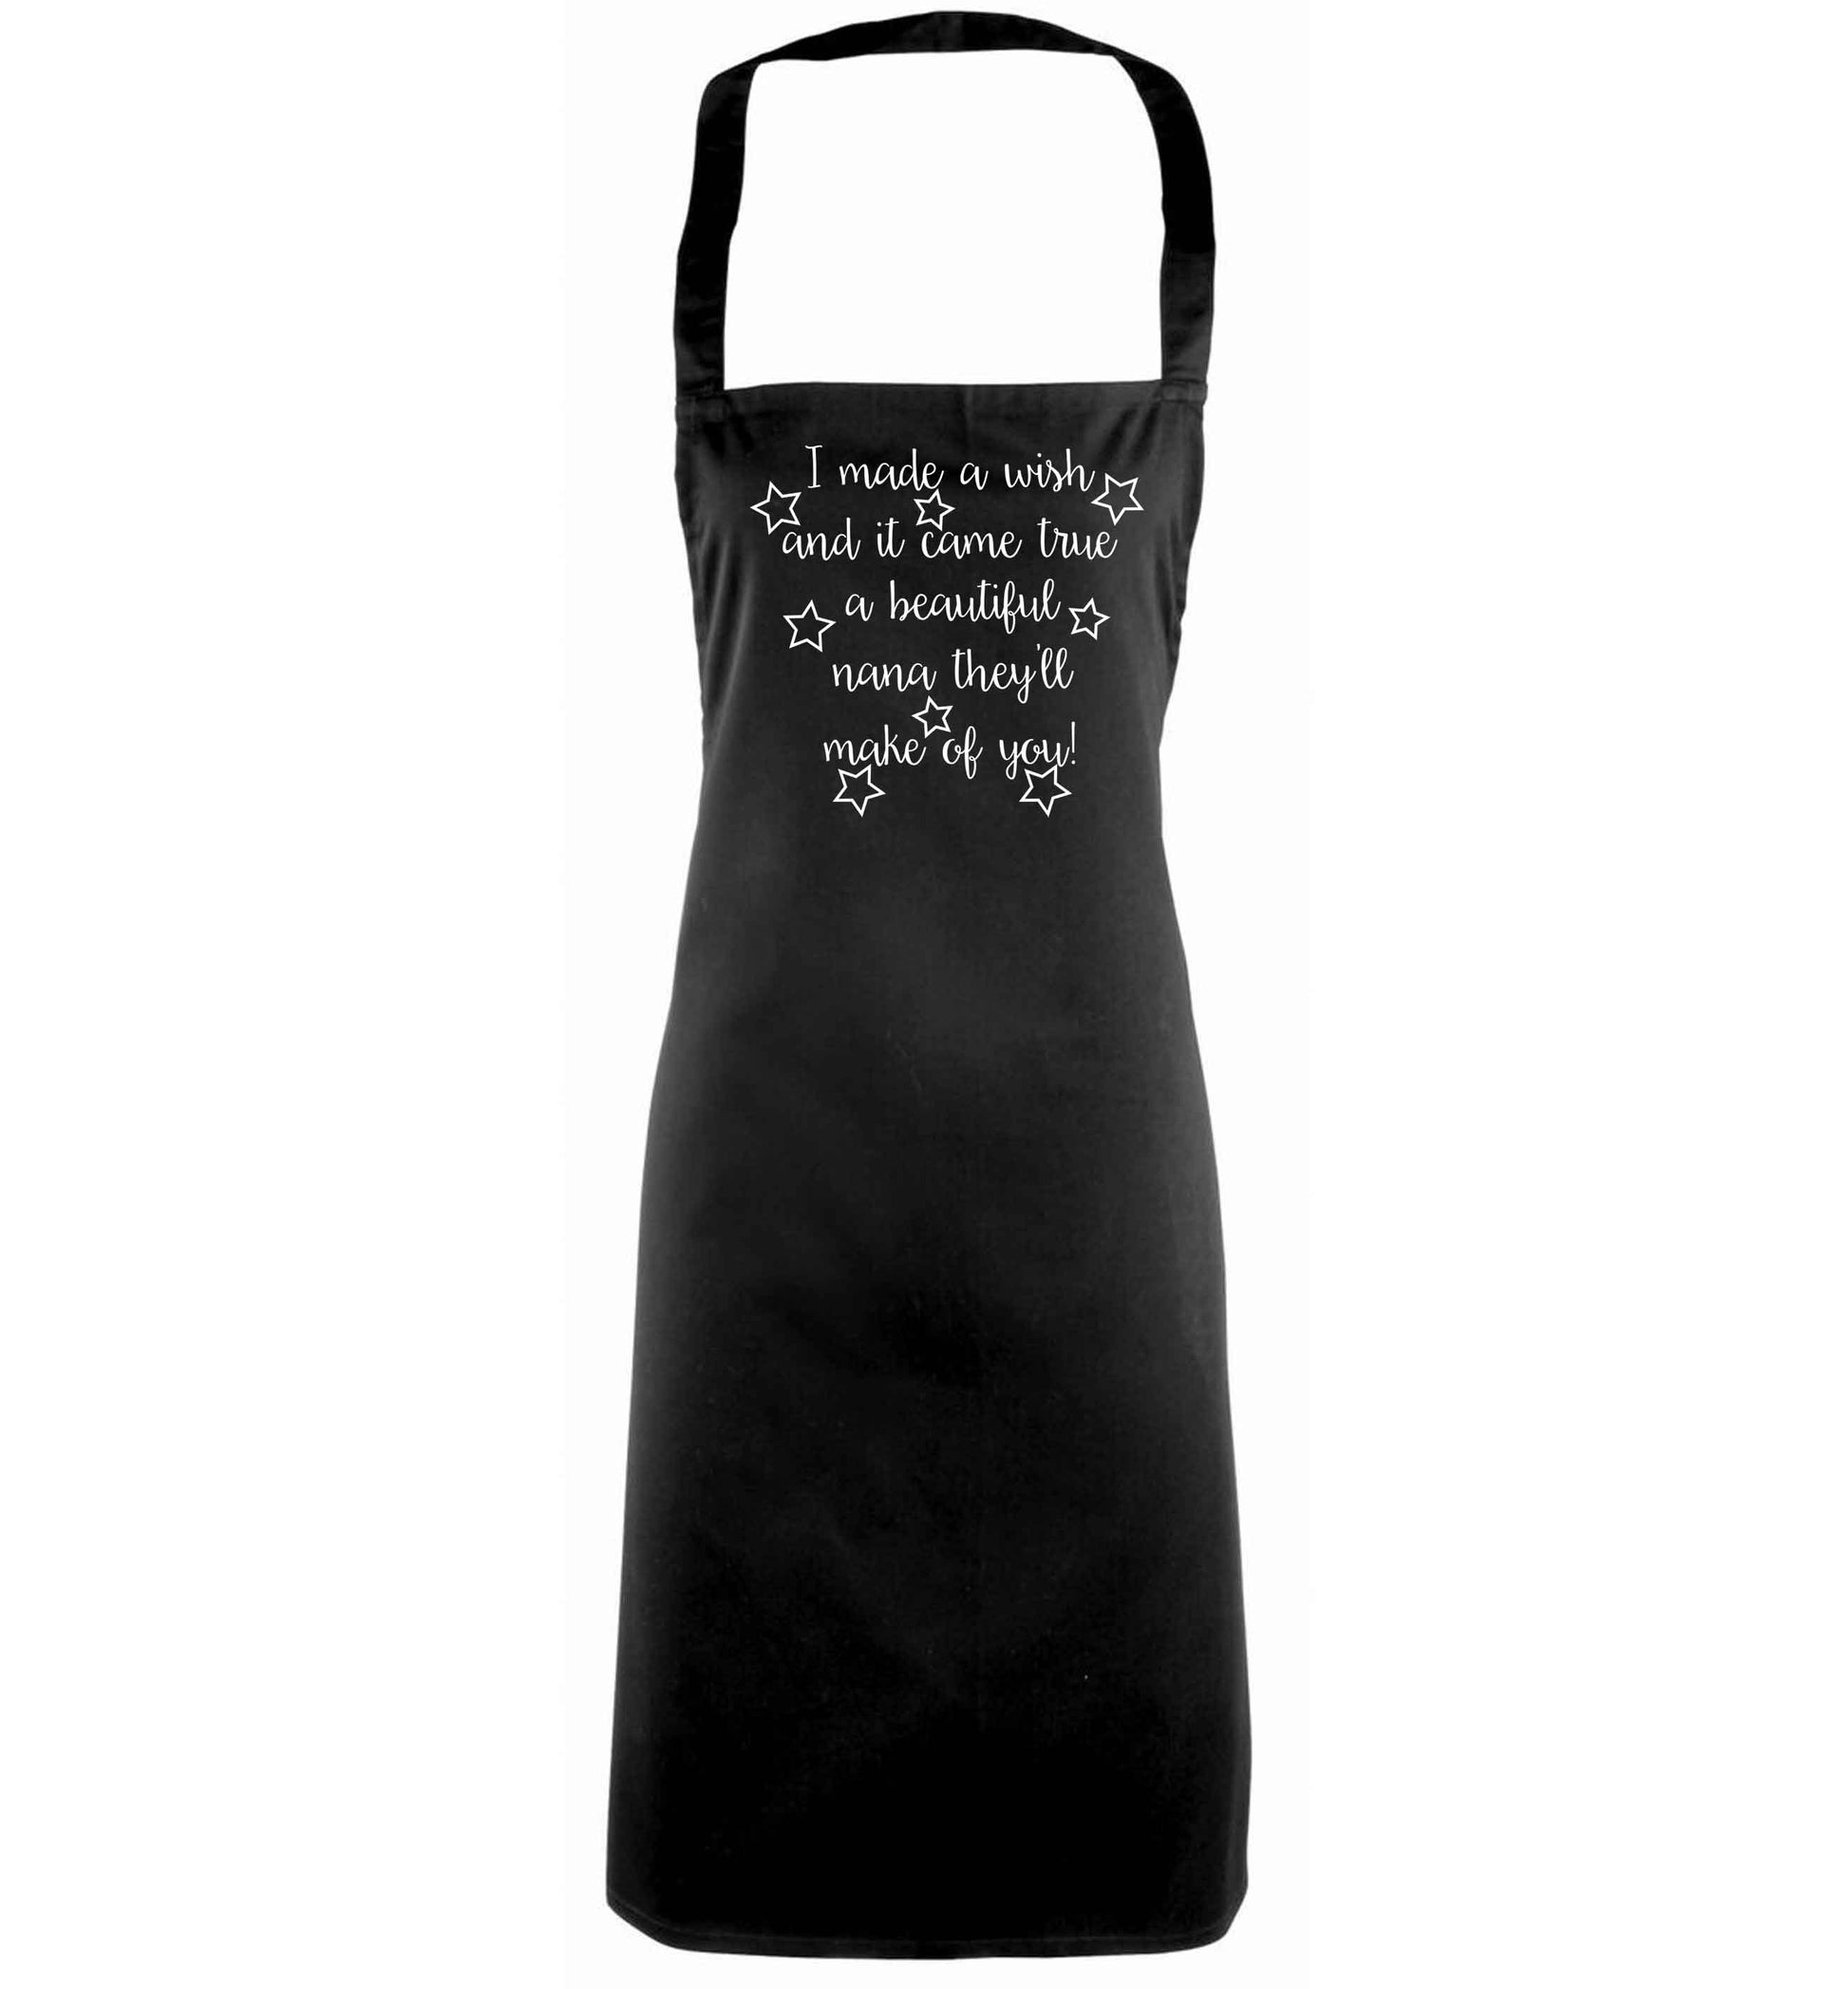 I made a wish and it came true a beautiful nana they'll make of you! black apron